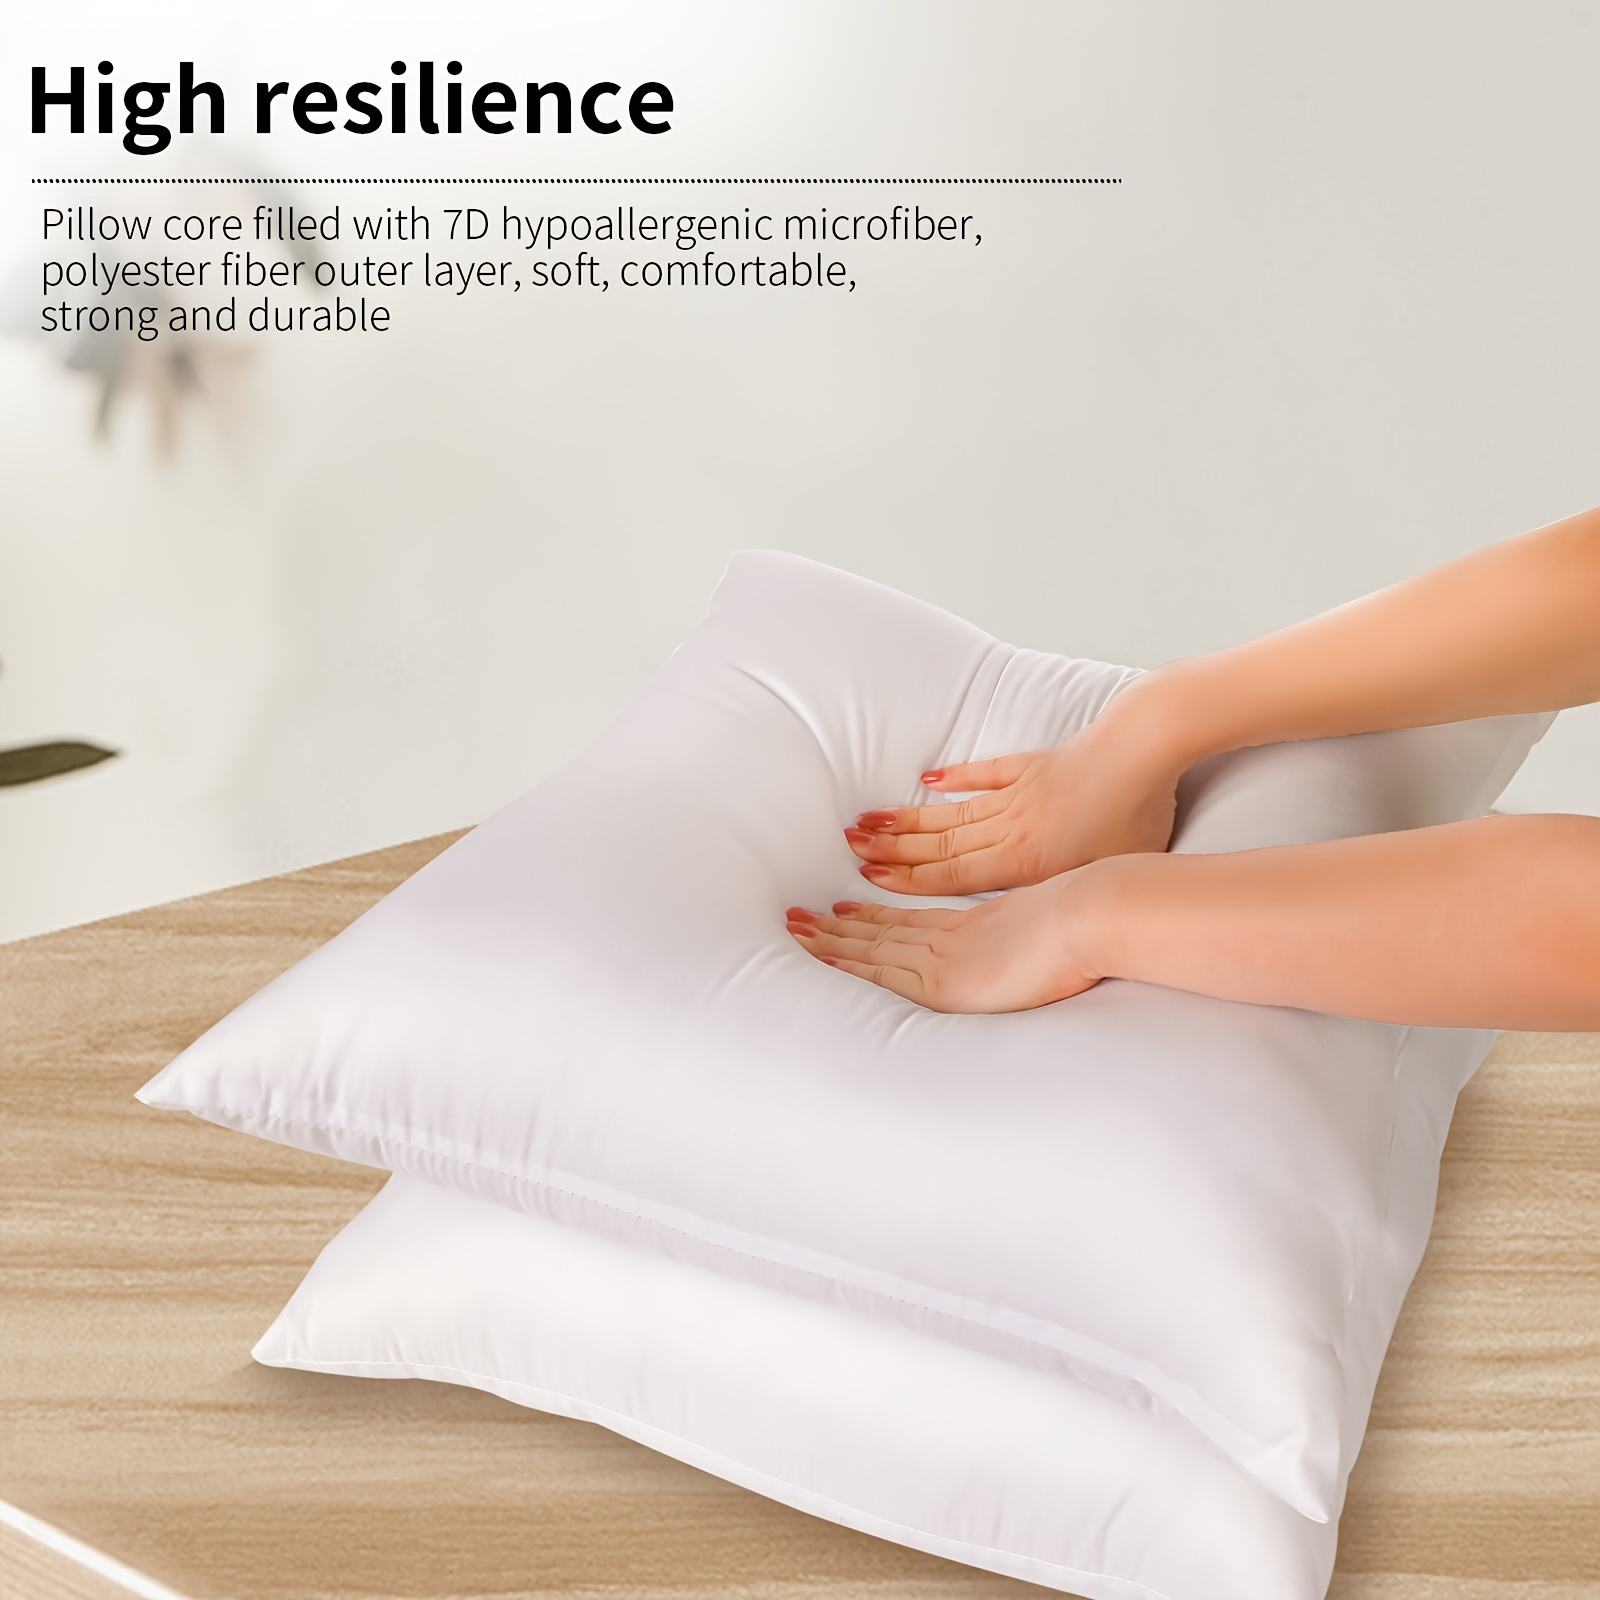 Set of 4 18x18 Hypoallergenic Soft Couch Pillow Inserts